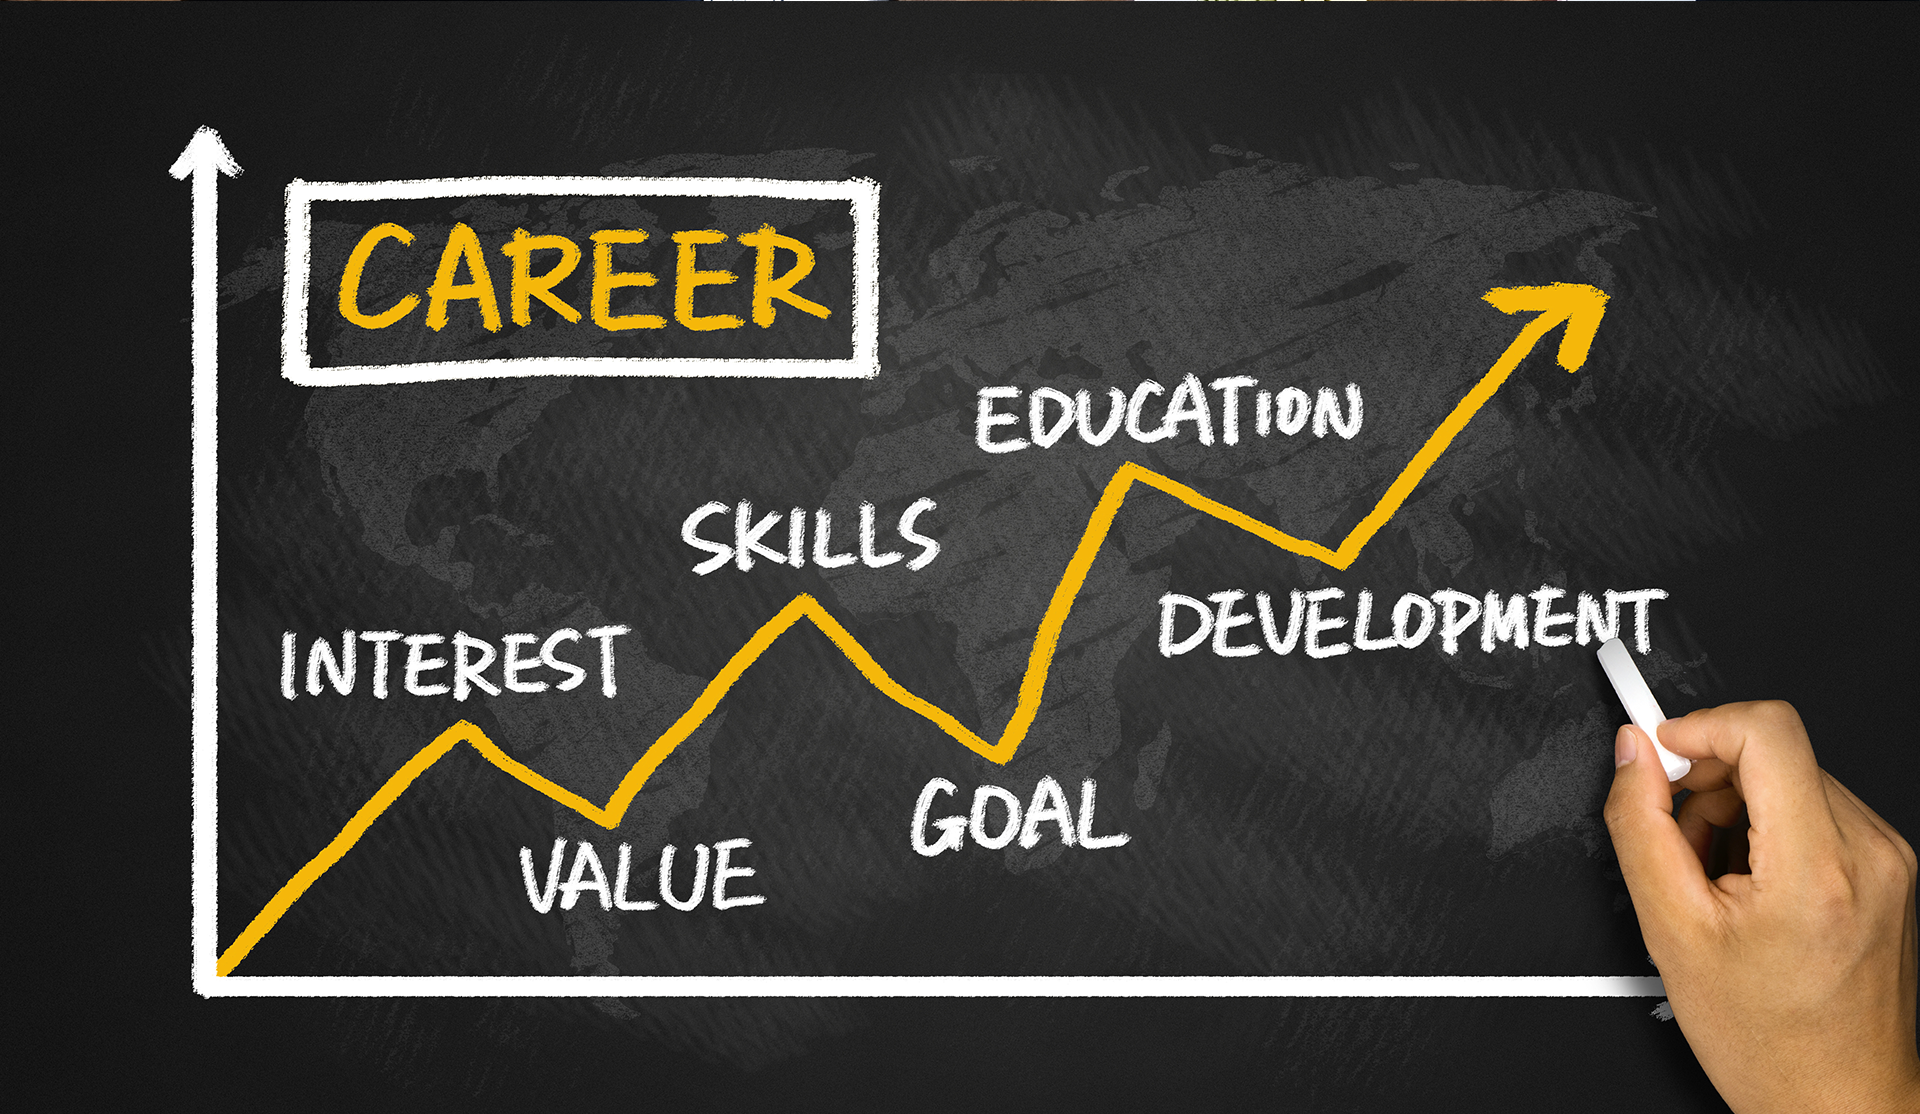 92Career: Your Ultimate Guide to Building a Successful Career